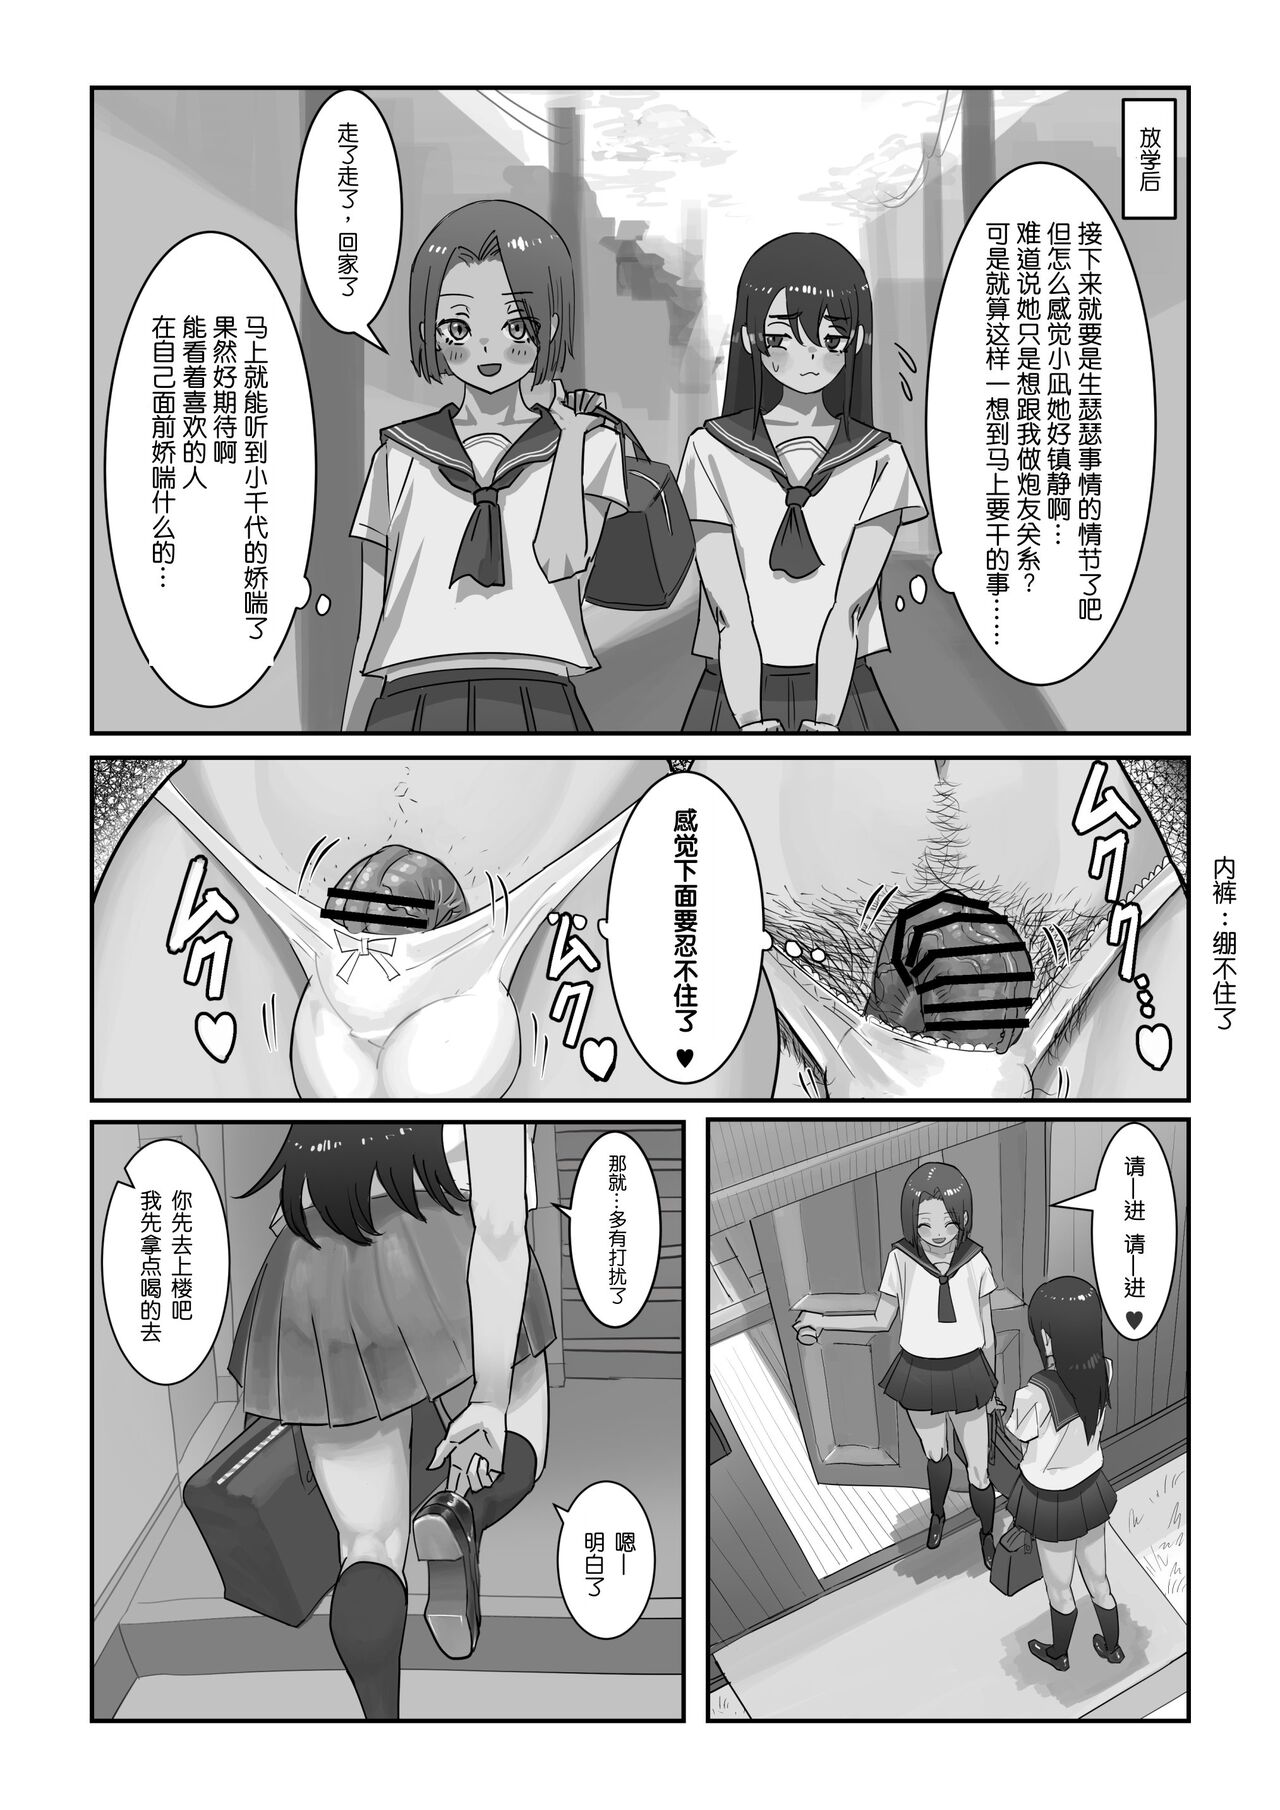 [Cave Squid] Onahole After School [Chinese] [洞窟イカ] 放課後ニセおマンコ [中国翻訳]